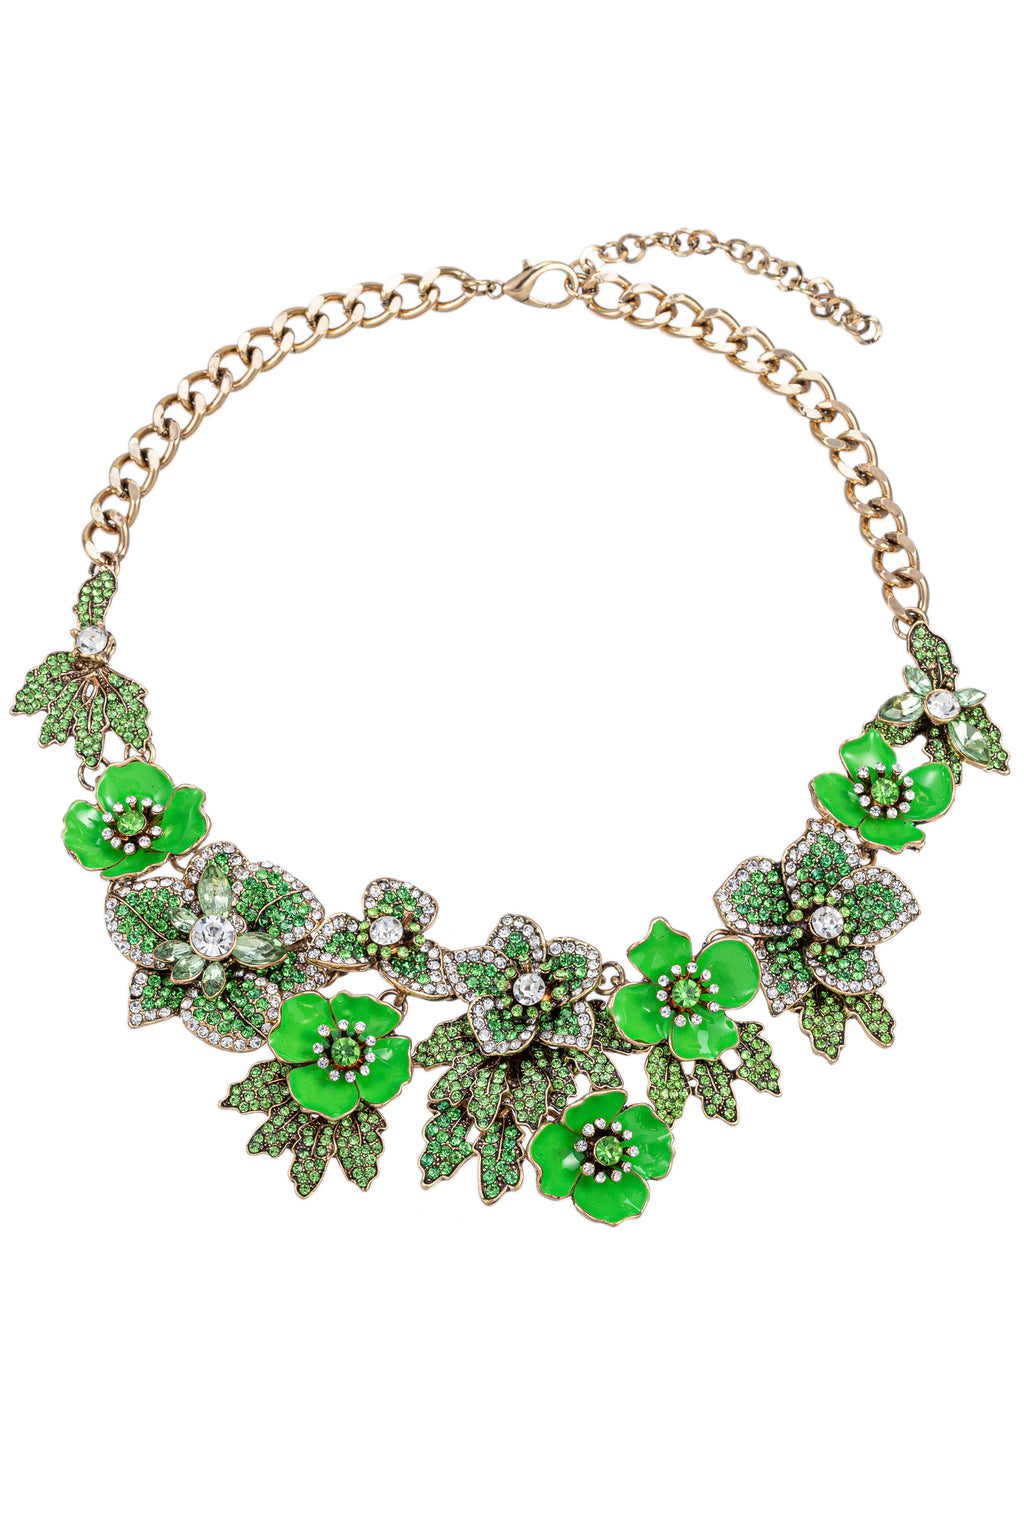 Green floral statement necklace.